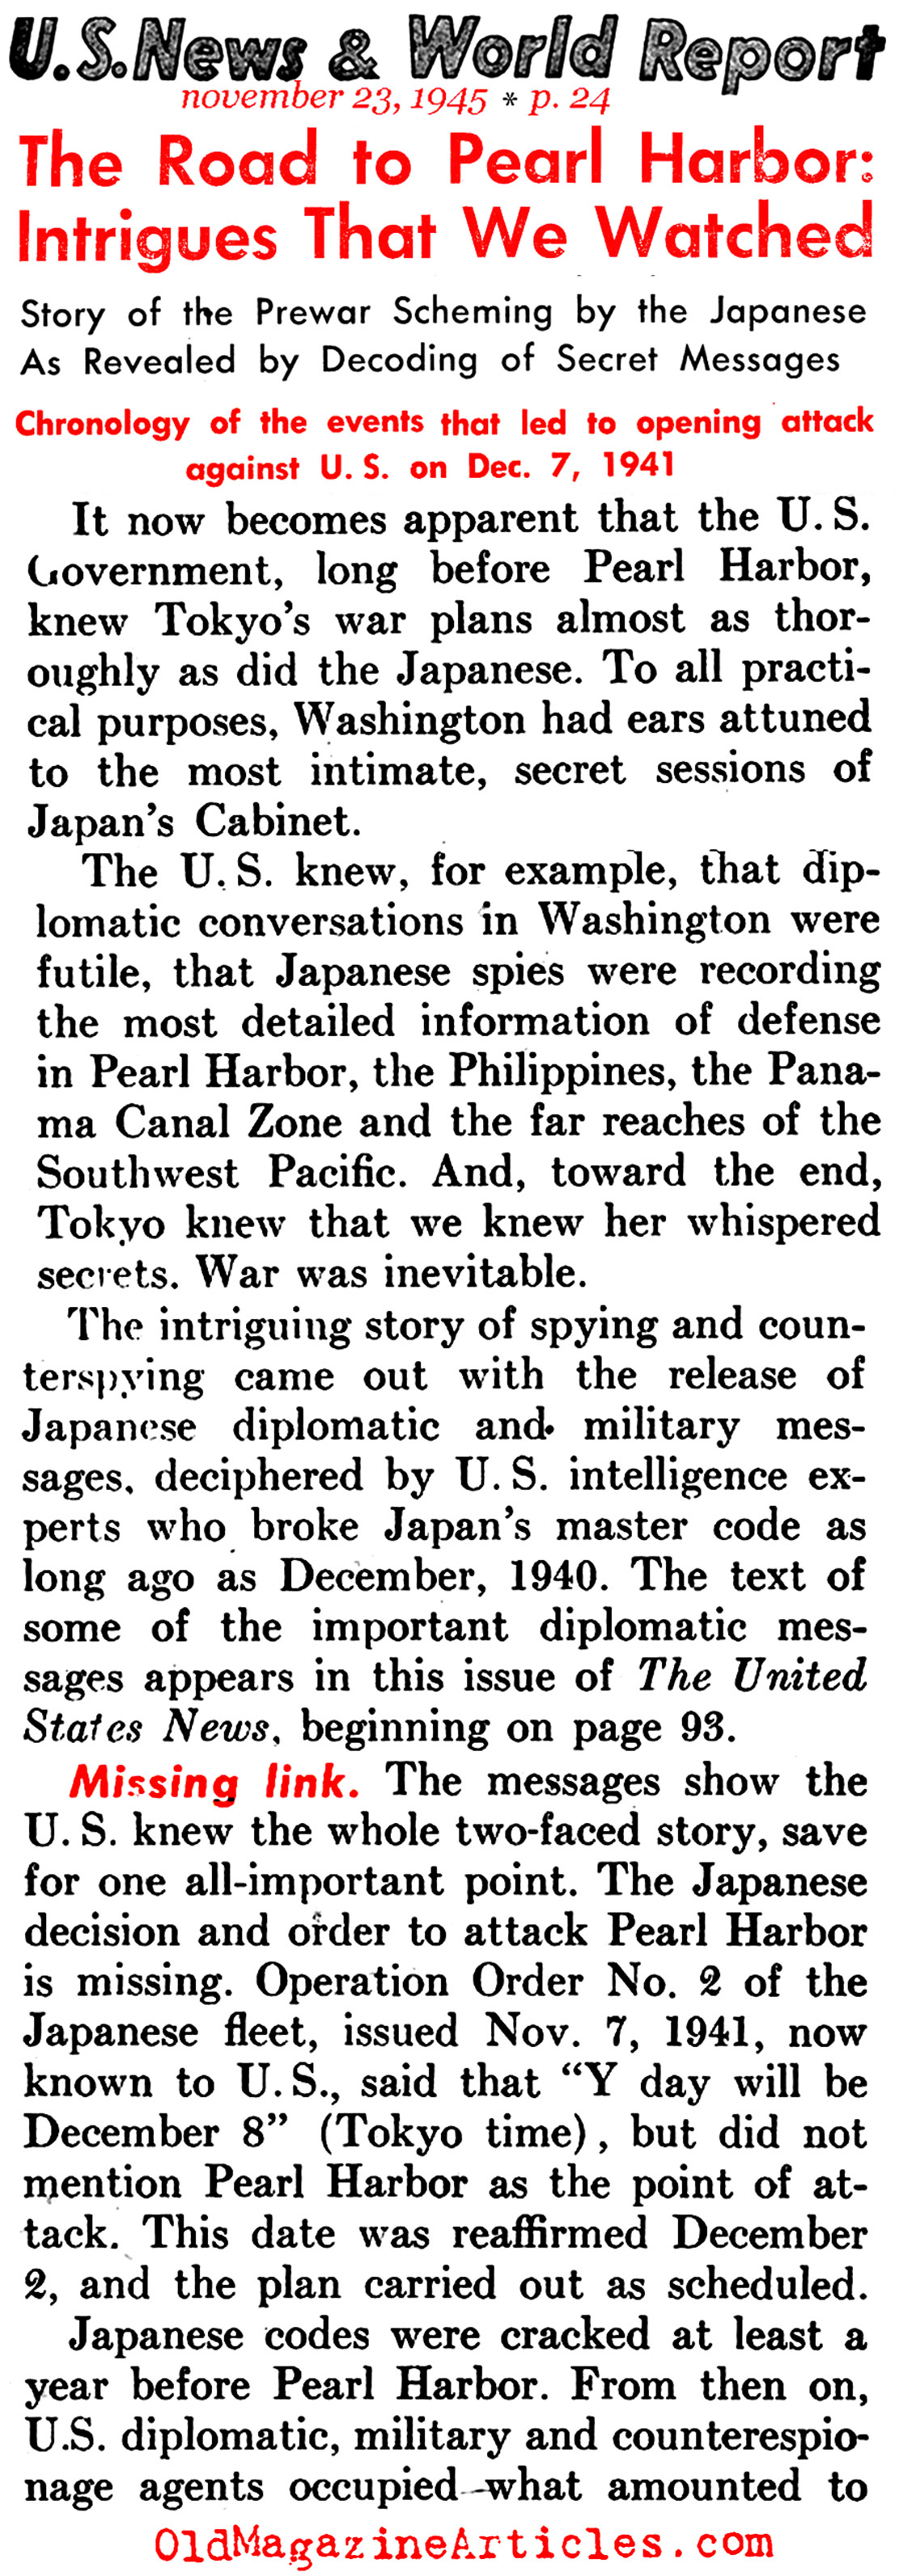 The Road to Pearl Harbor (United States News, 1945)